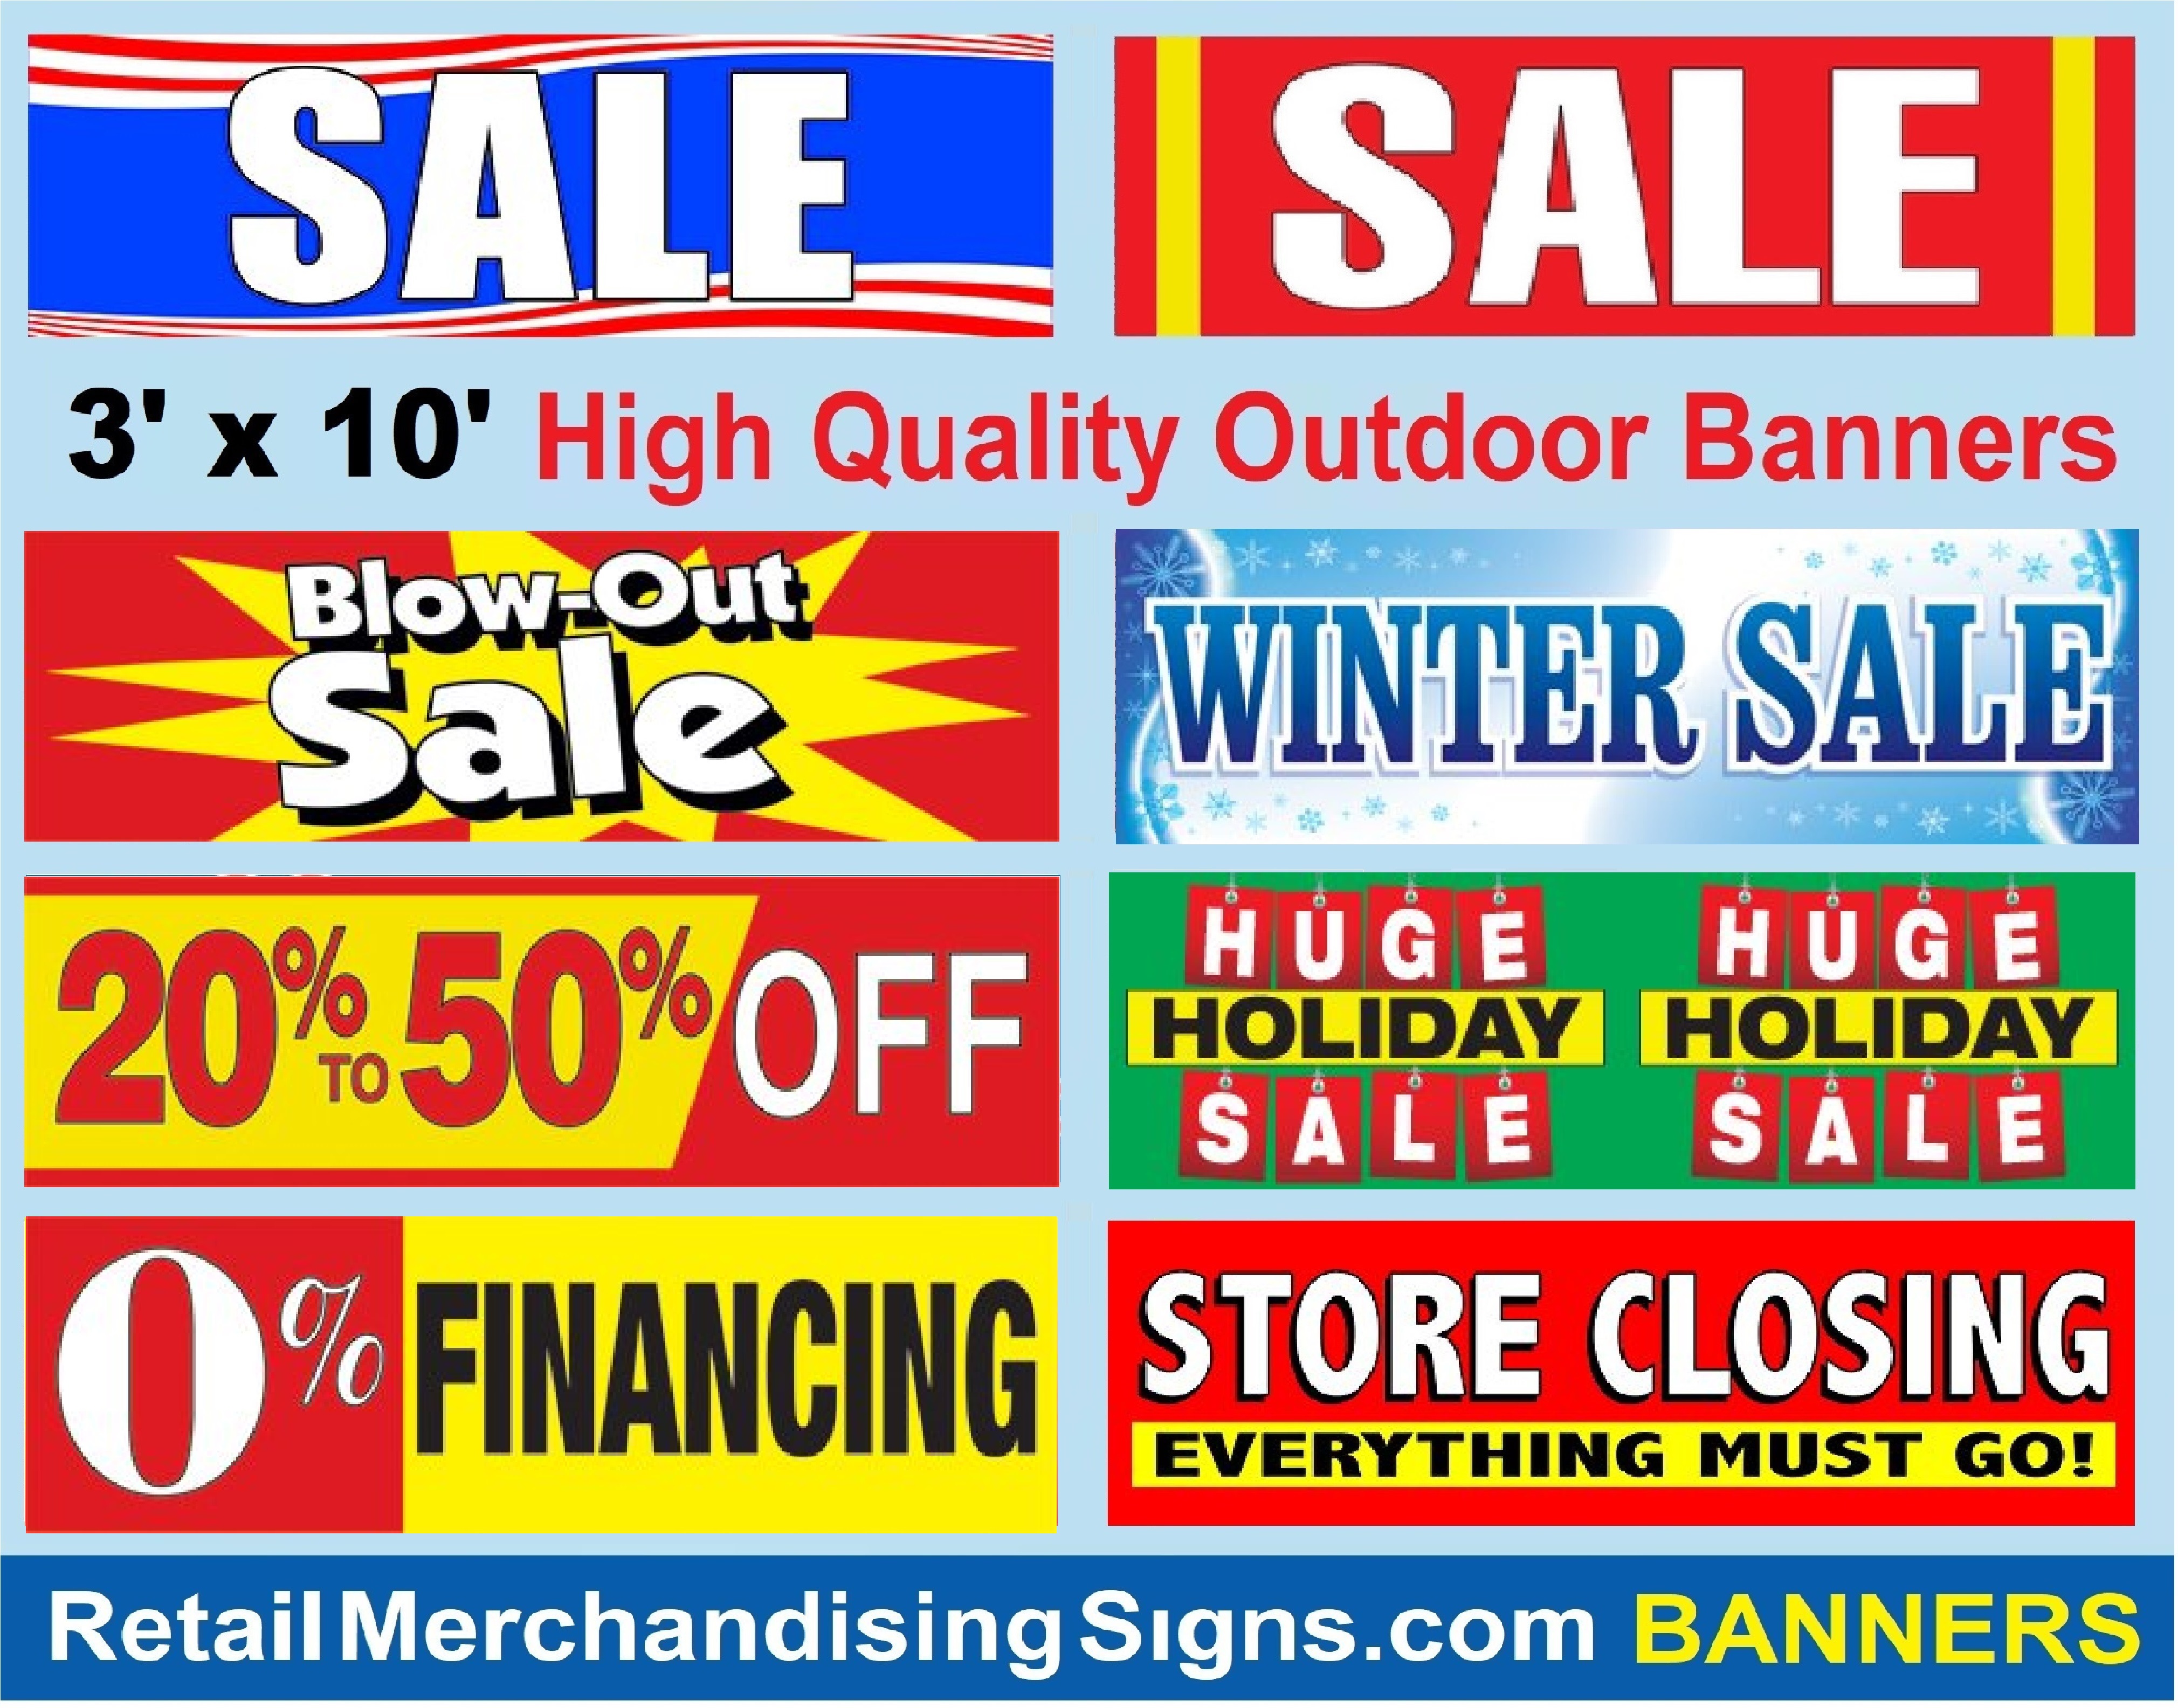 3' x 10' Banners